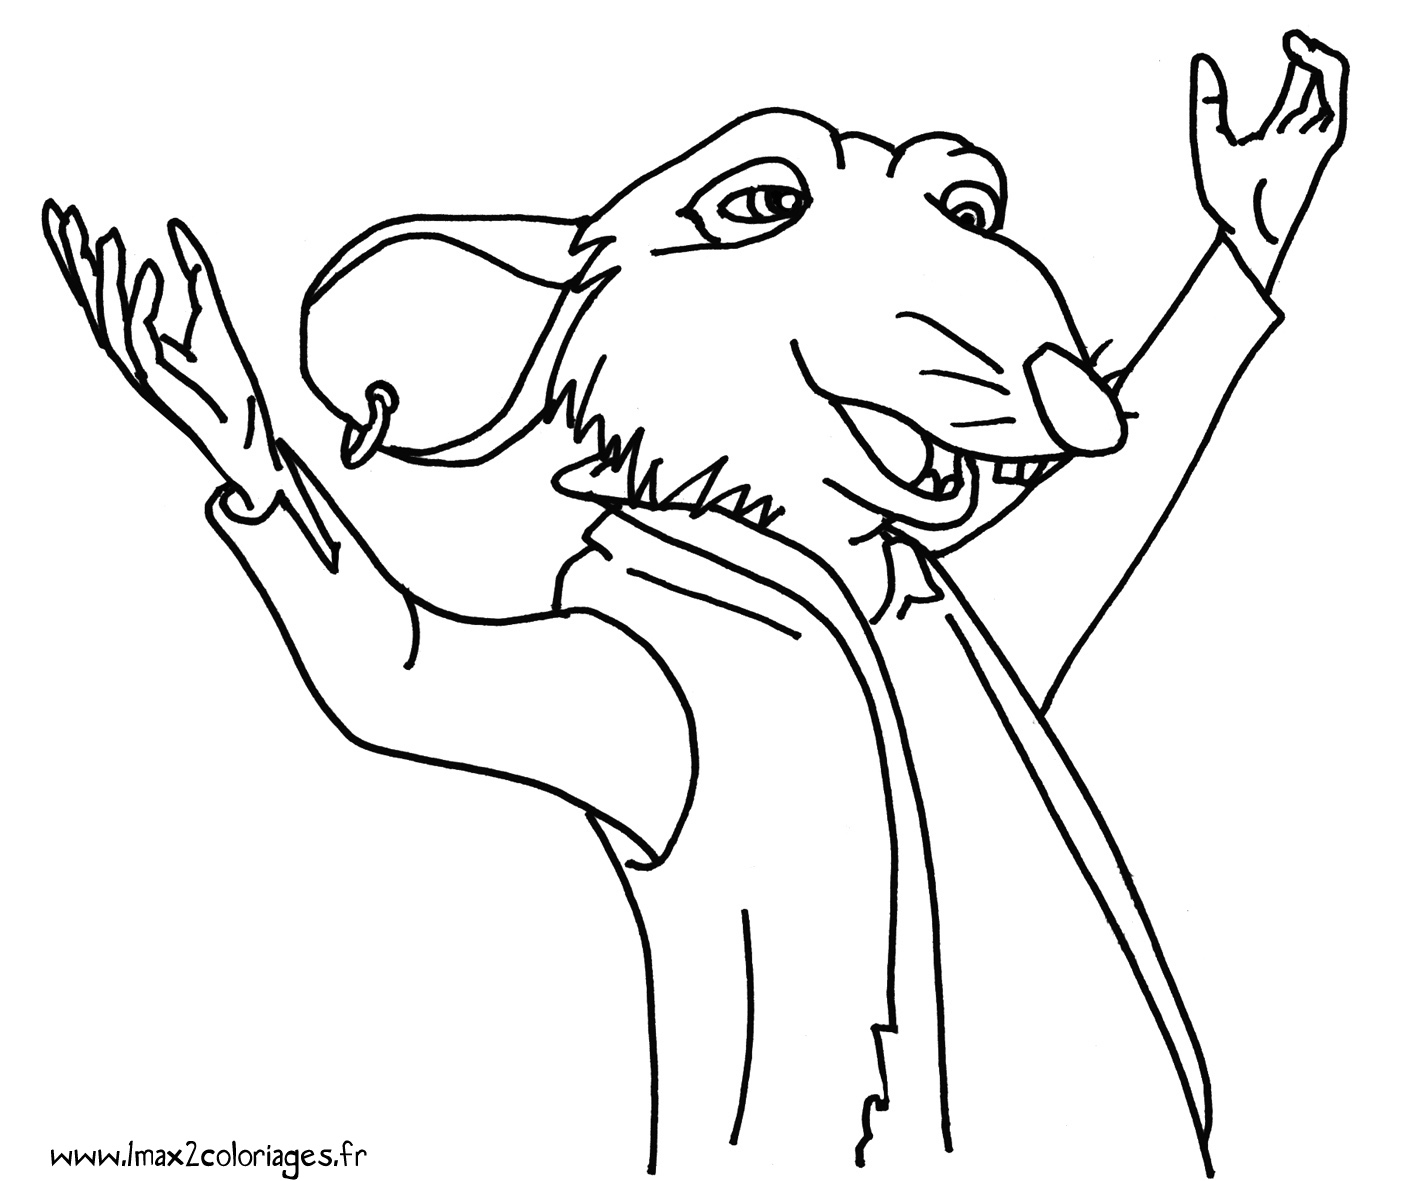 tale of despereaux free coloring pages - photo #11